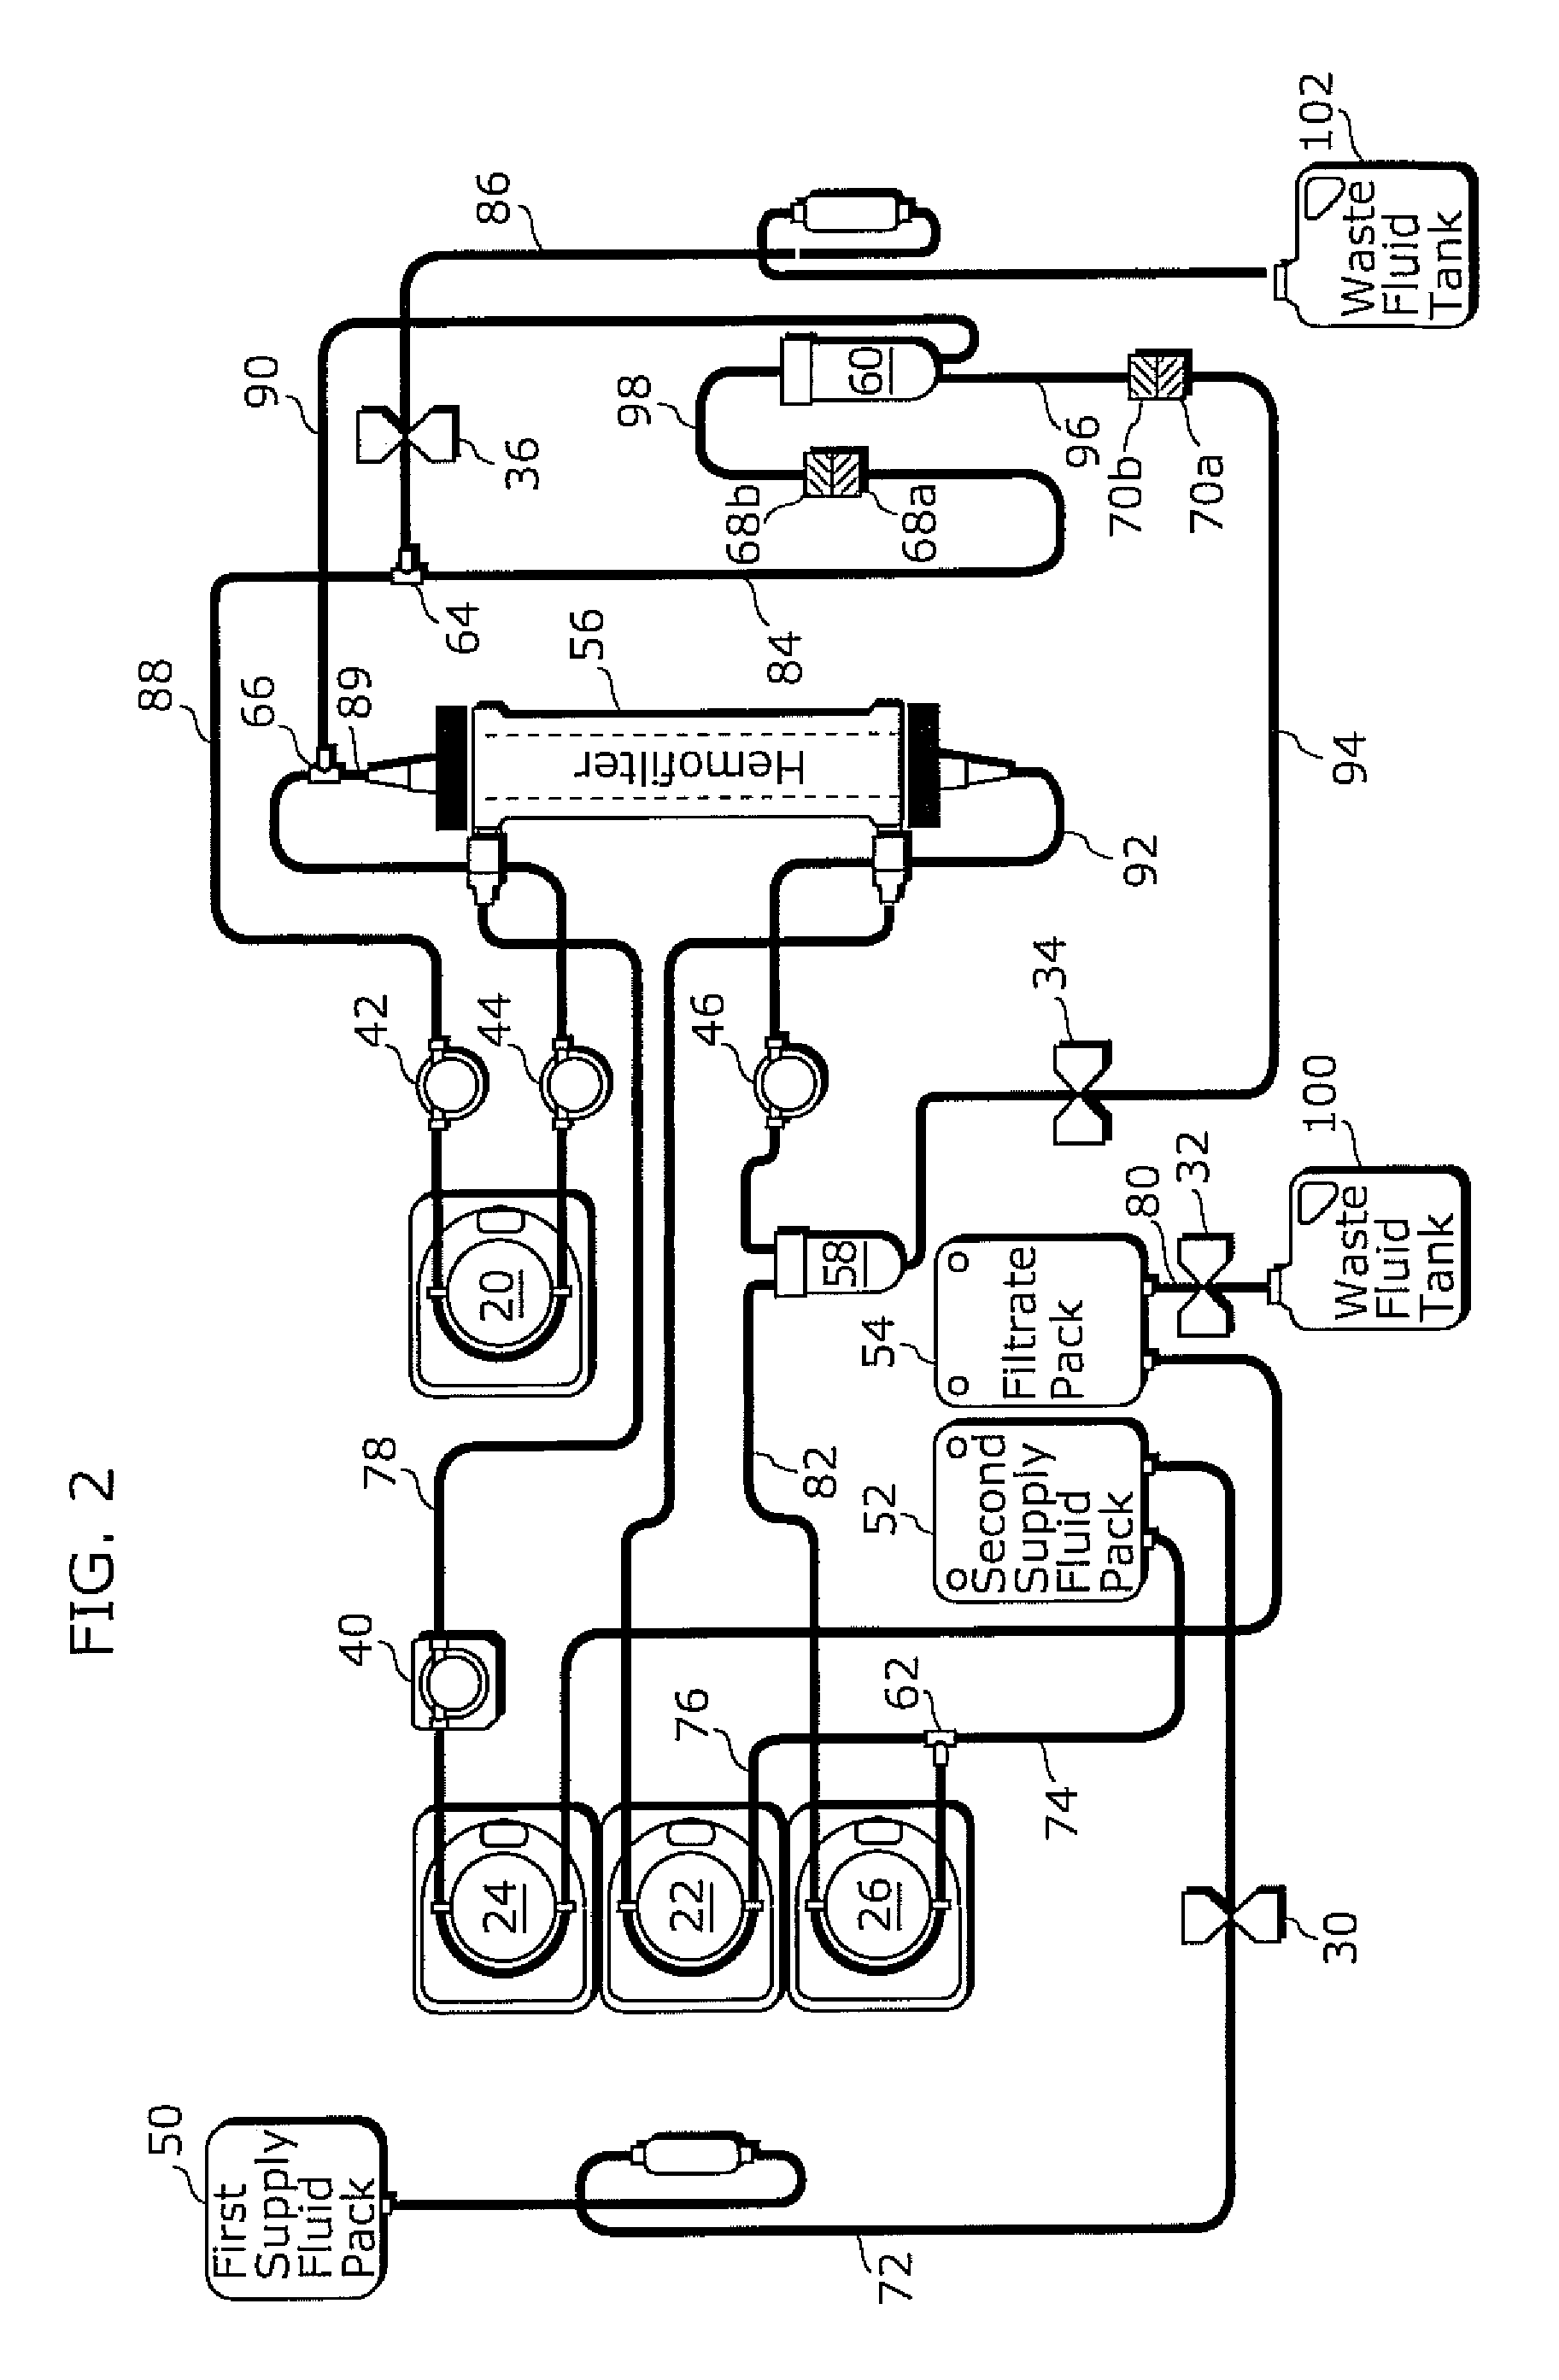 Blood circuit, blood purification control apparatus, and priming method